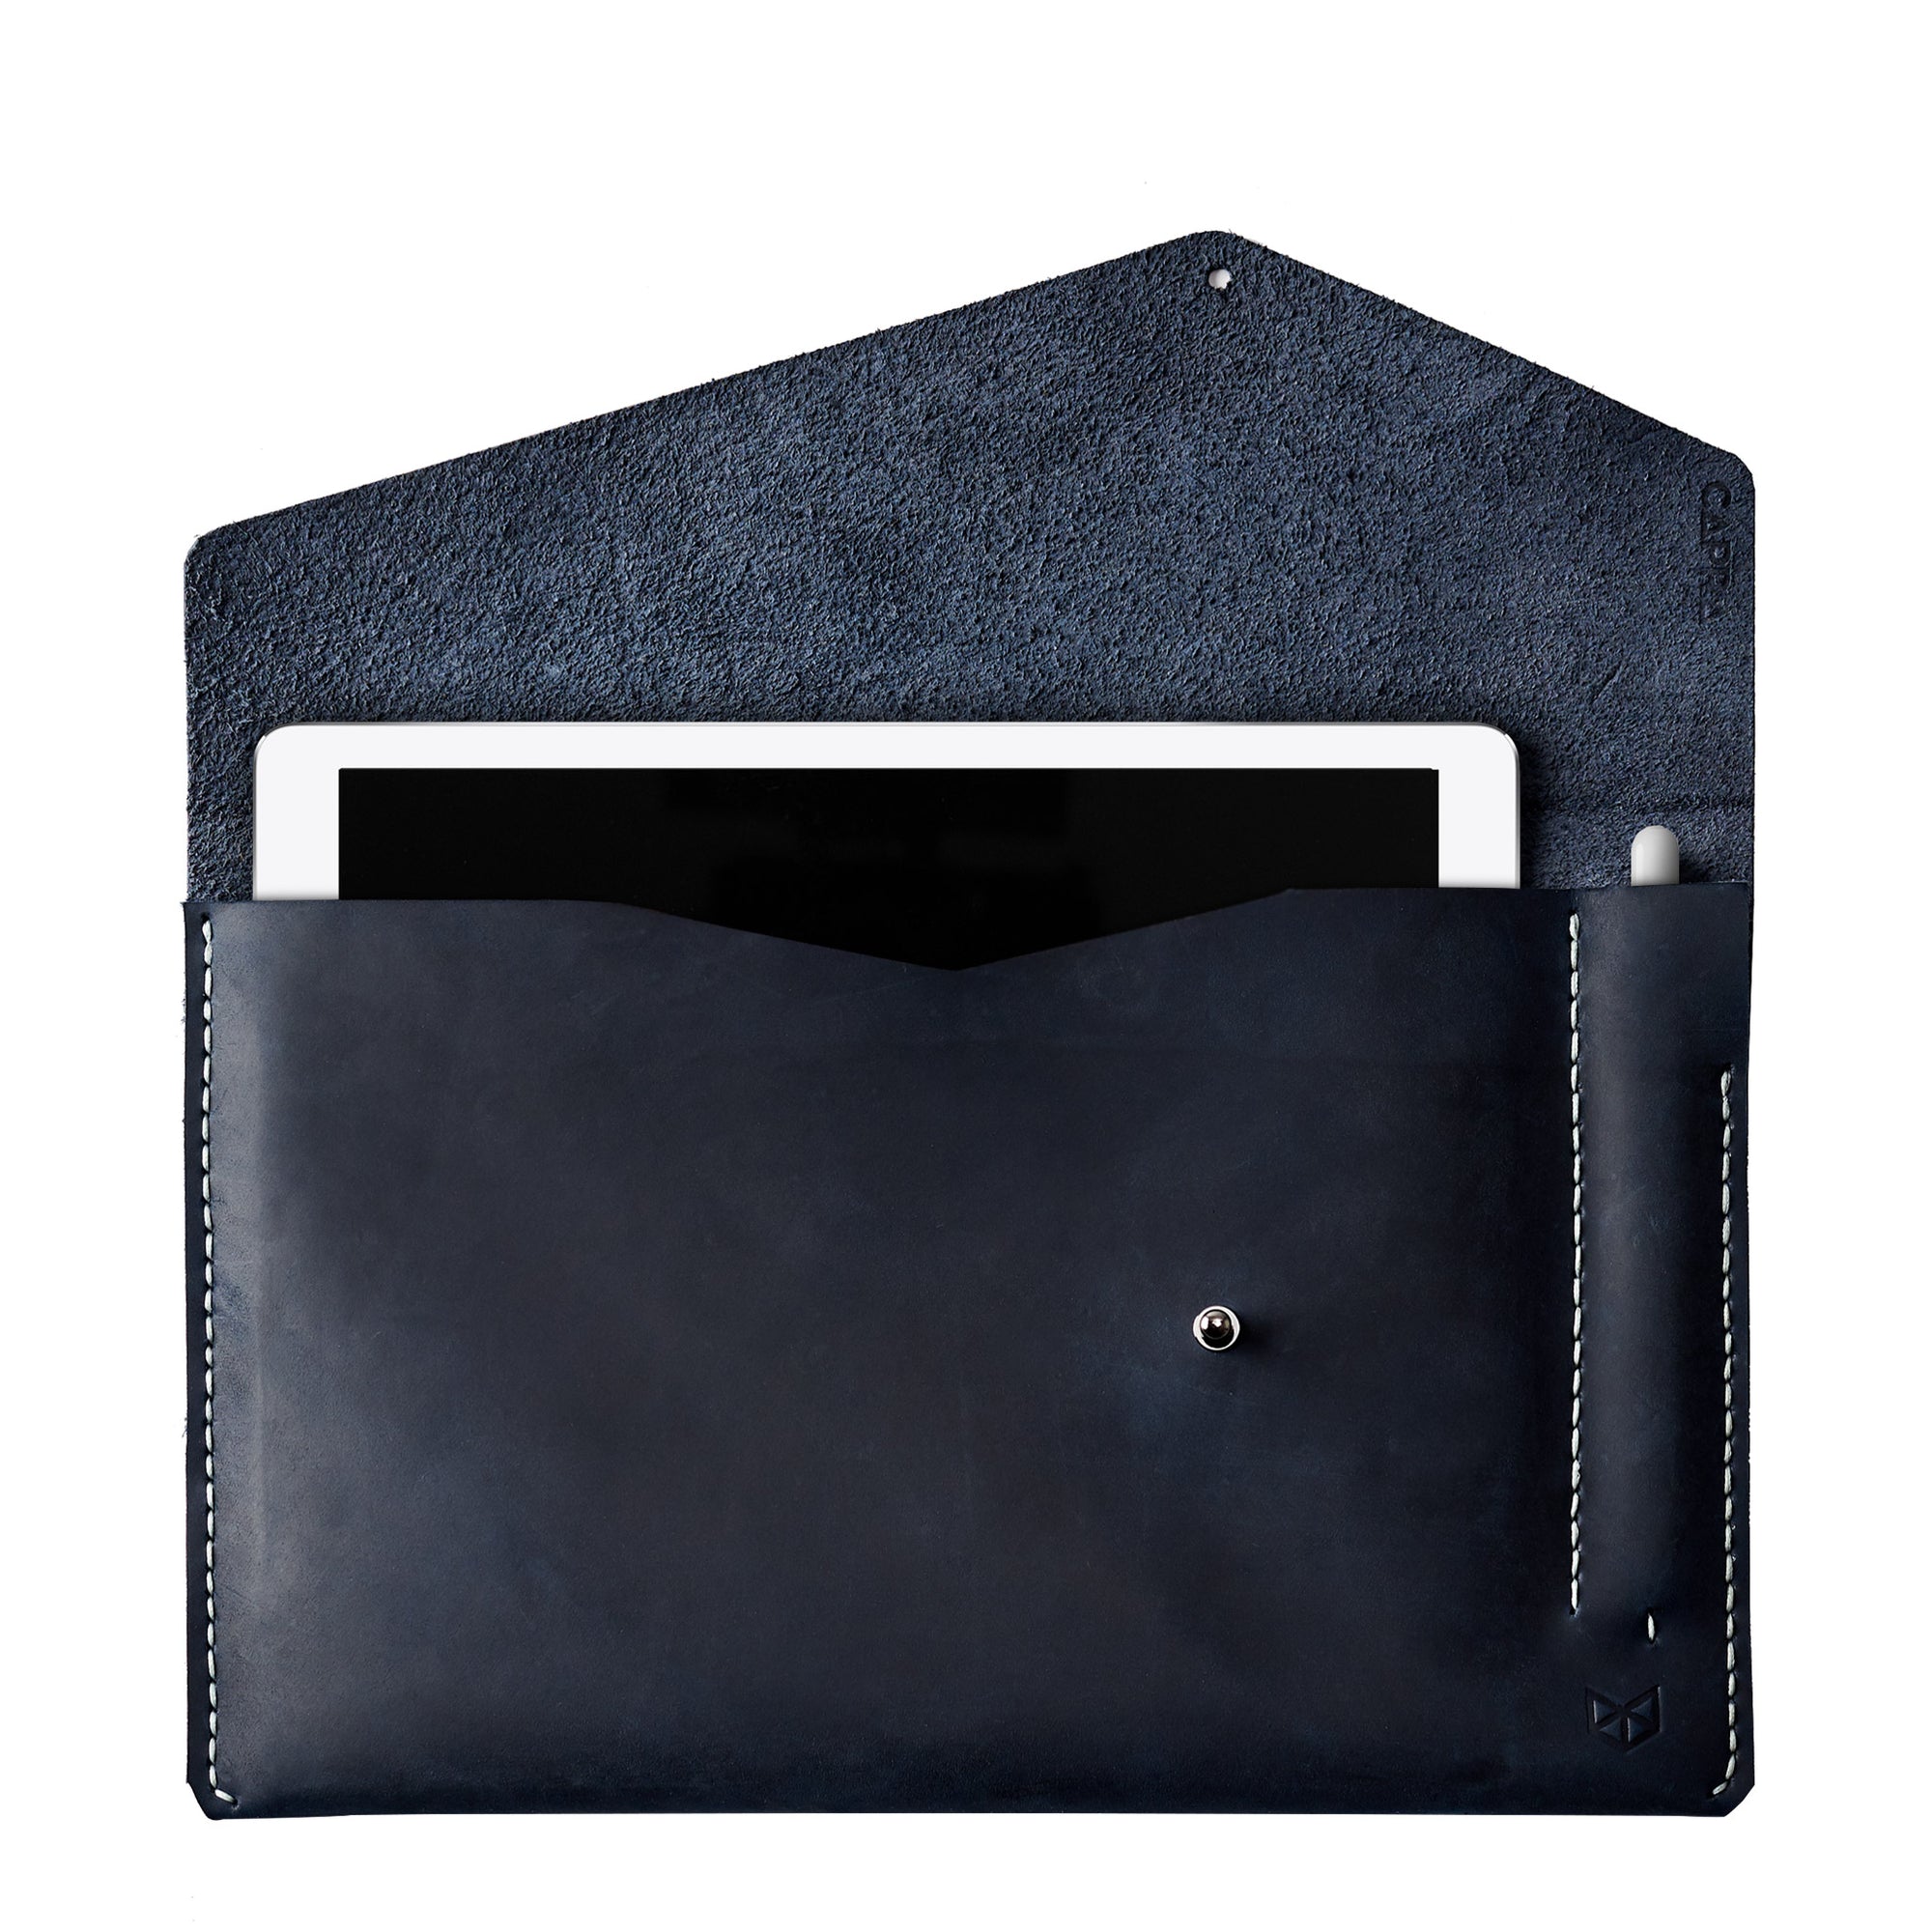 Blue leather sleeve for iPad pro 10.5 inch 12.9 inch. Mens gifts